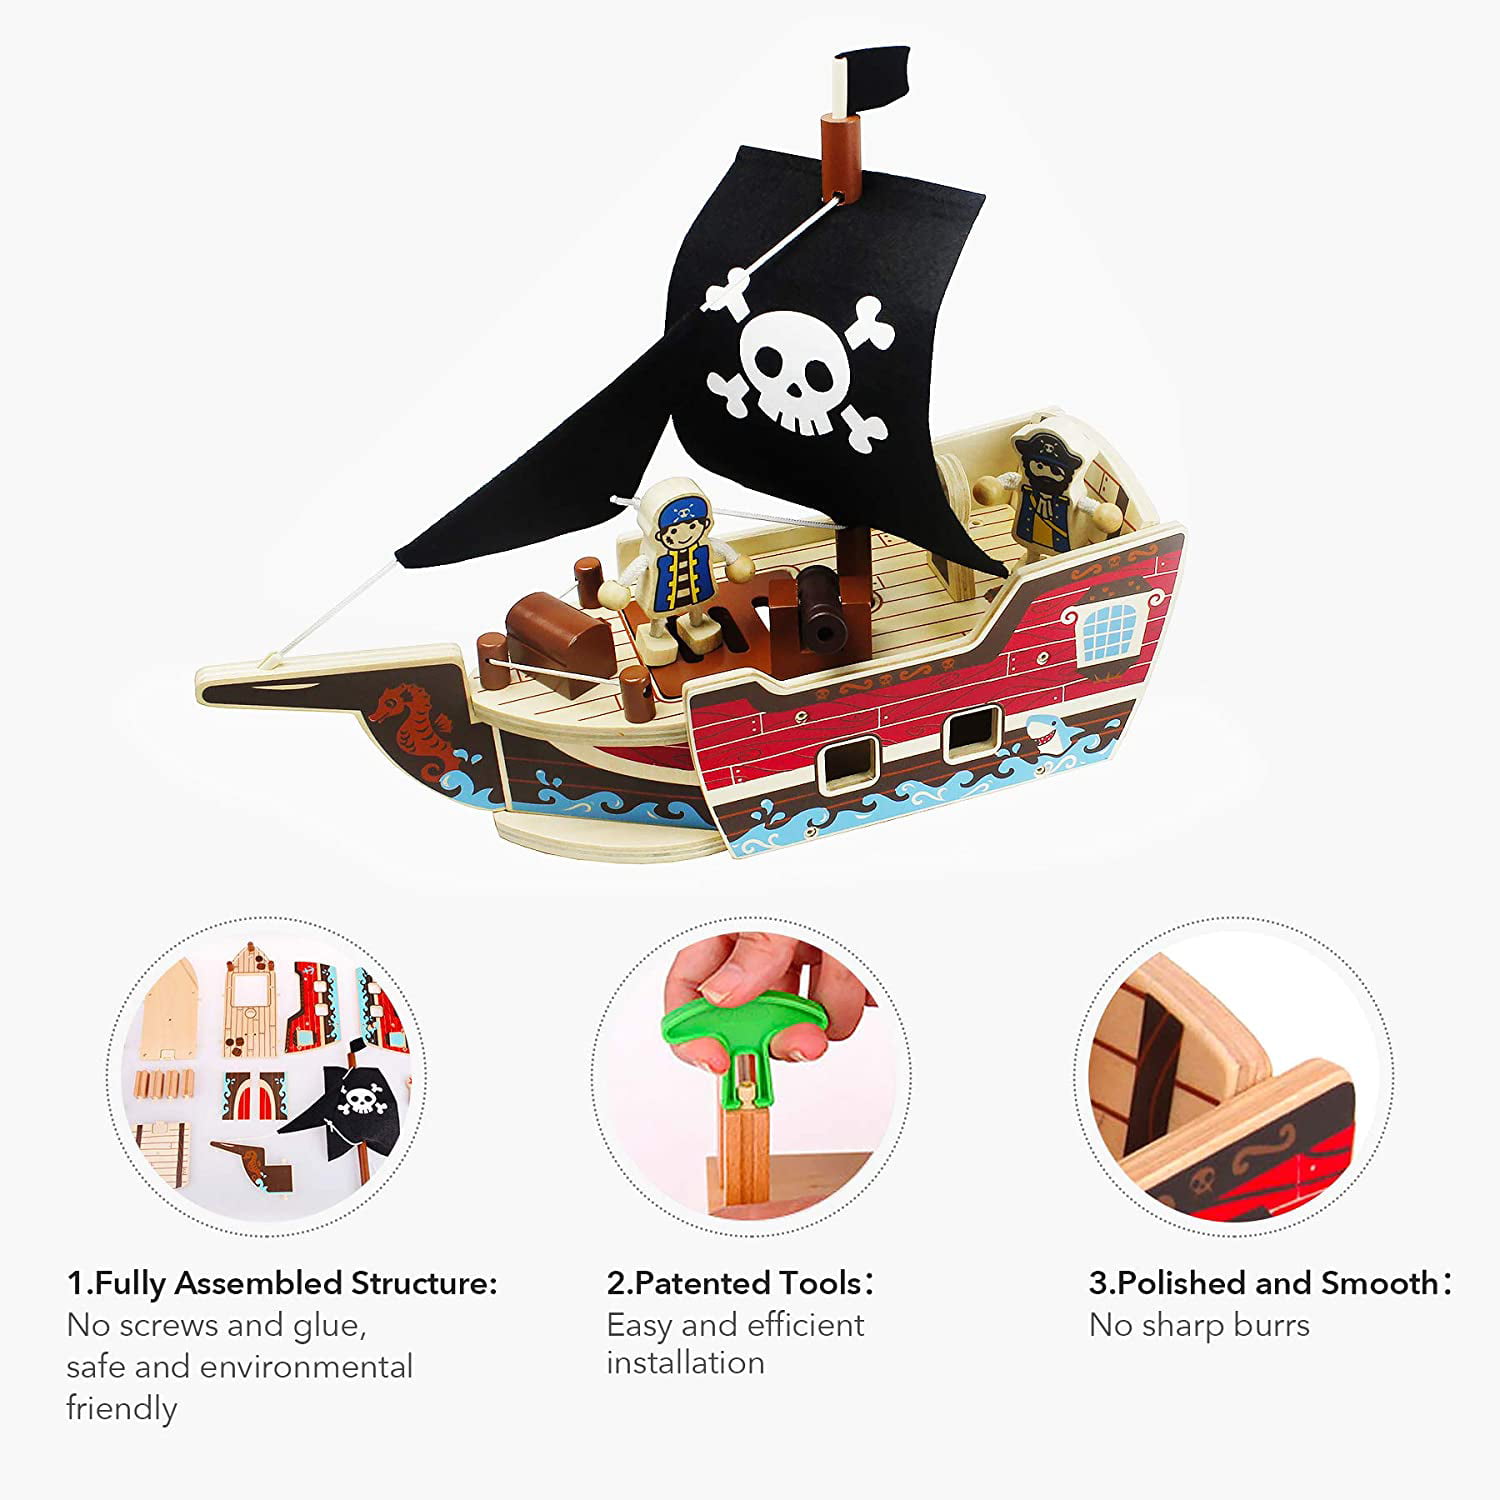 PIRATE SHIP Ship in A Bottle Kit - WoodKrafters Kits